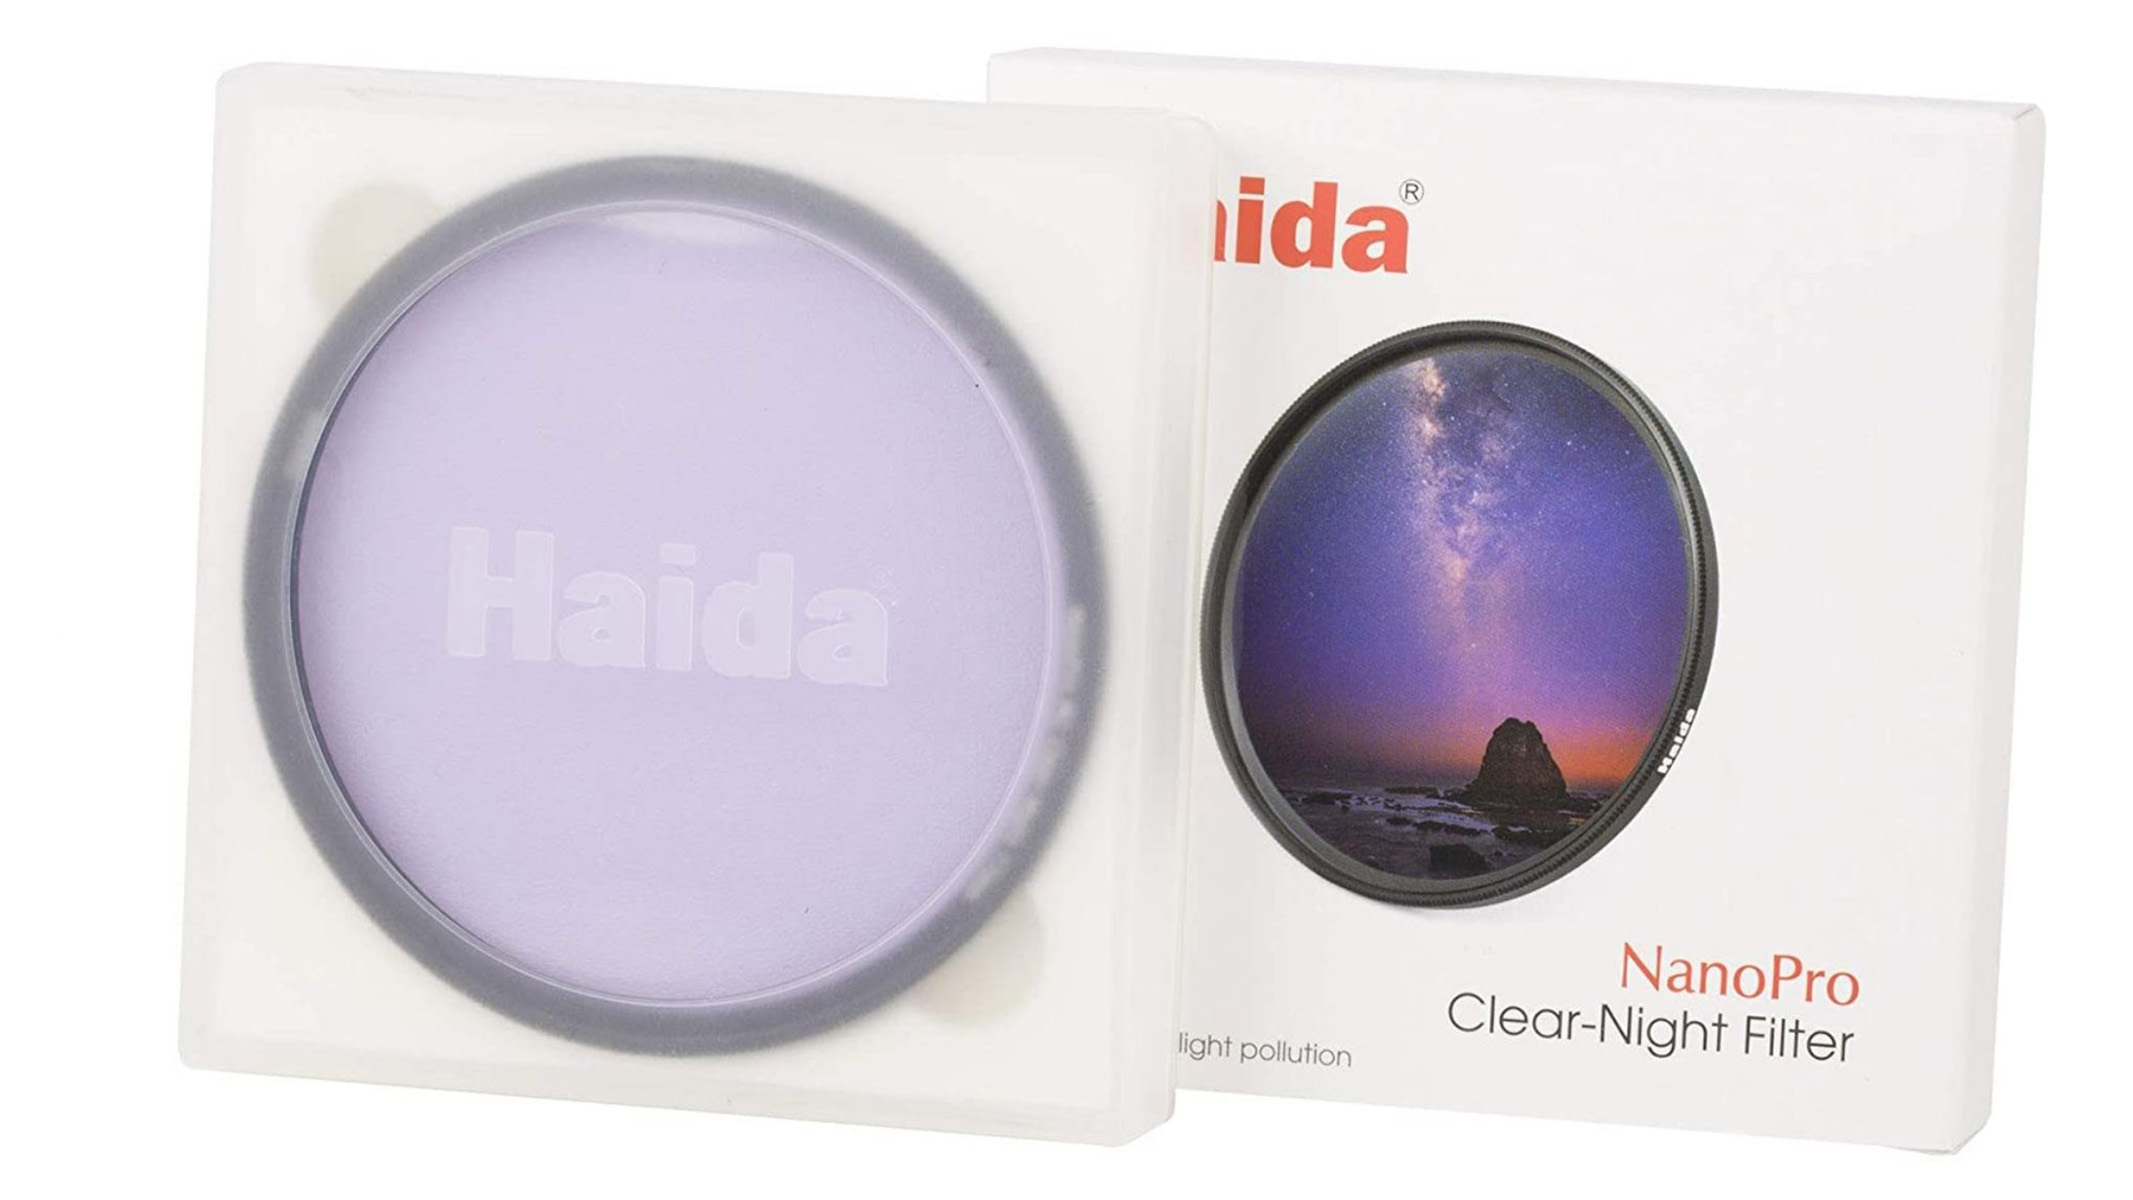 Haida NanoPro MC Clear-Night filters in their packaging on a white background